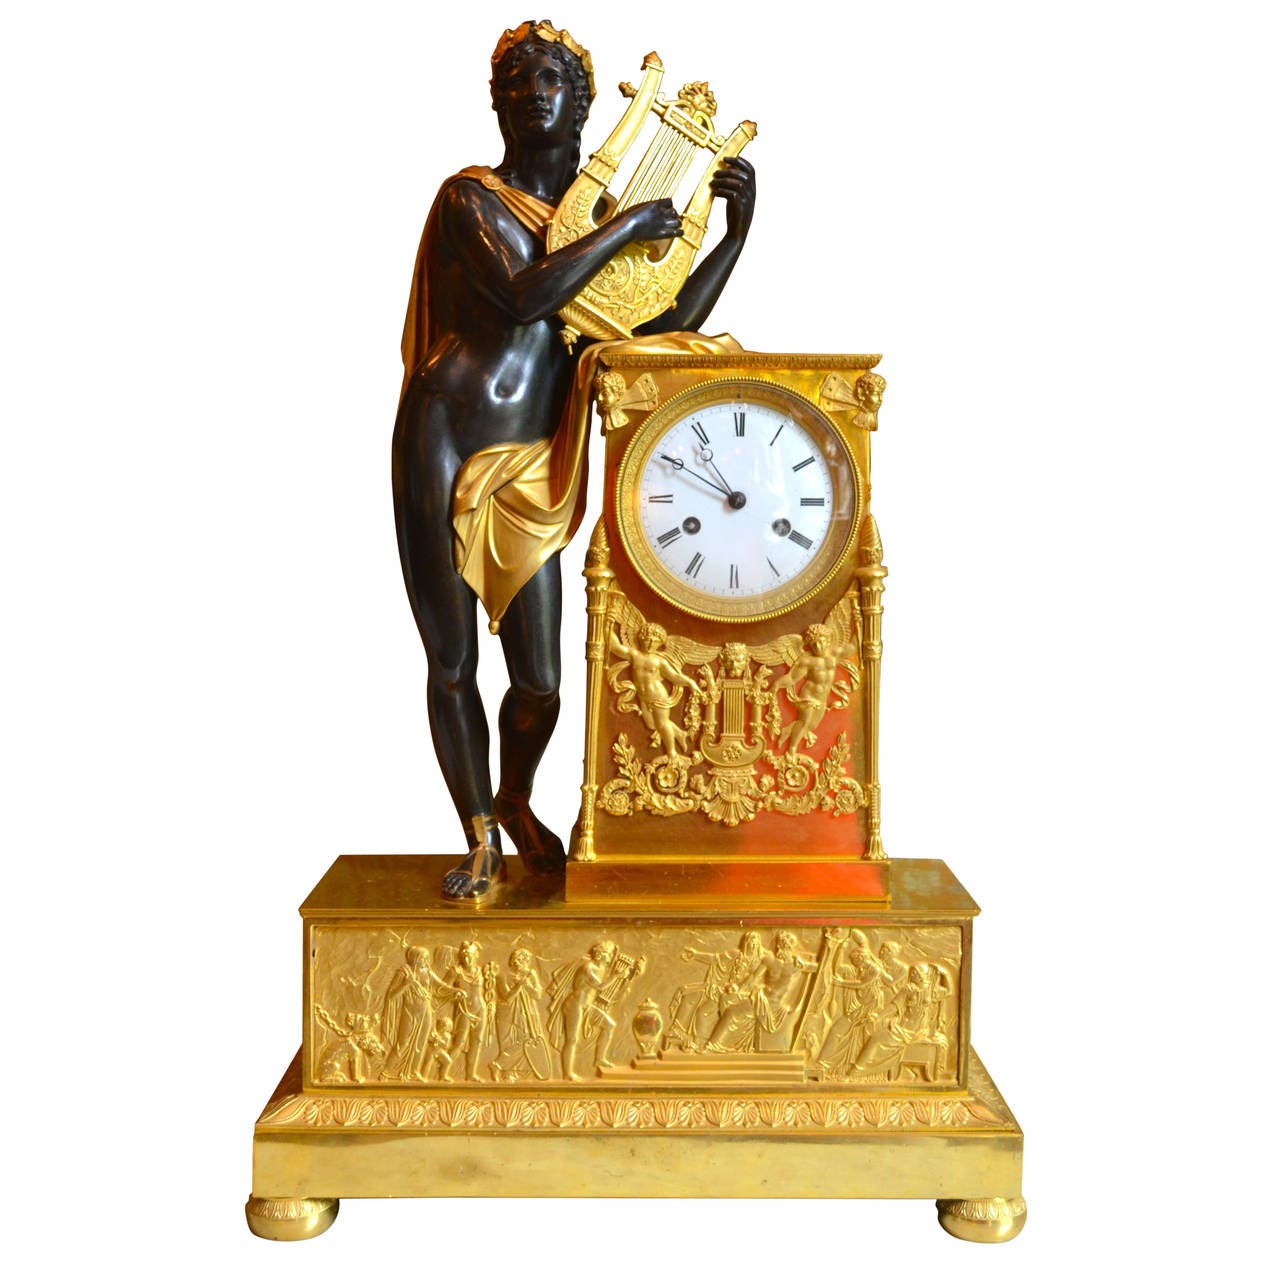 Period Empire Clock Featuring a Standing Apollo, God of Music For Sale